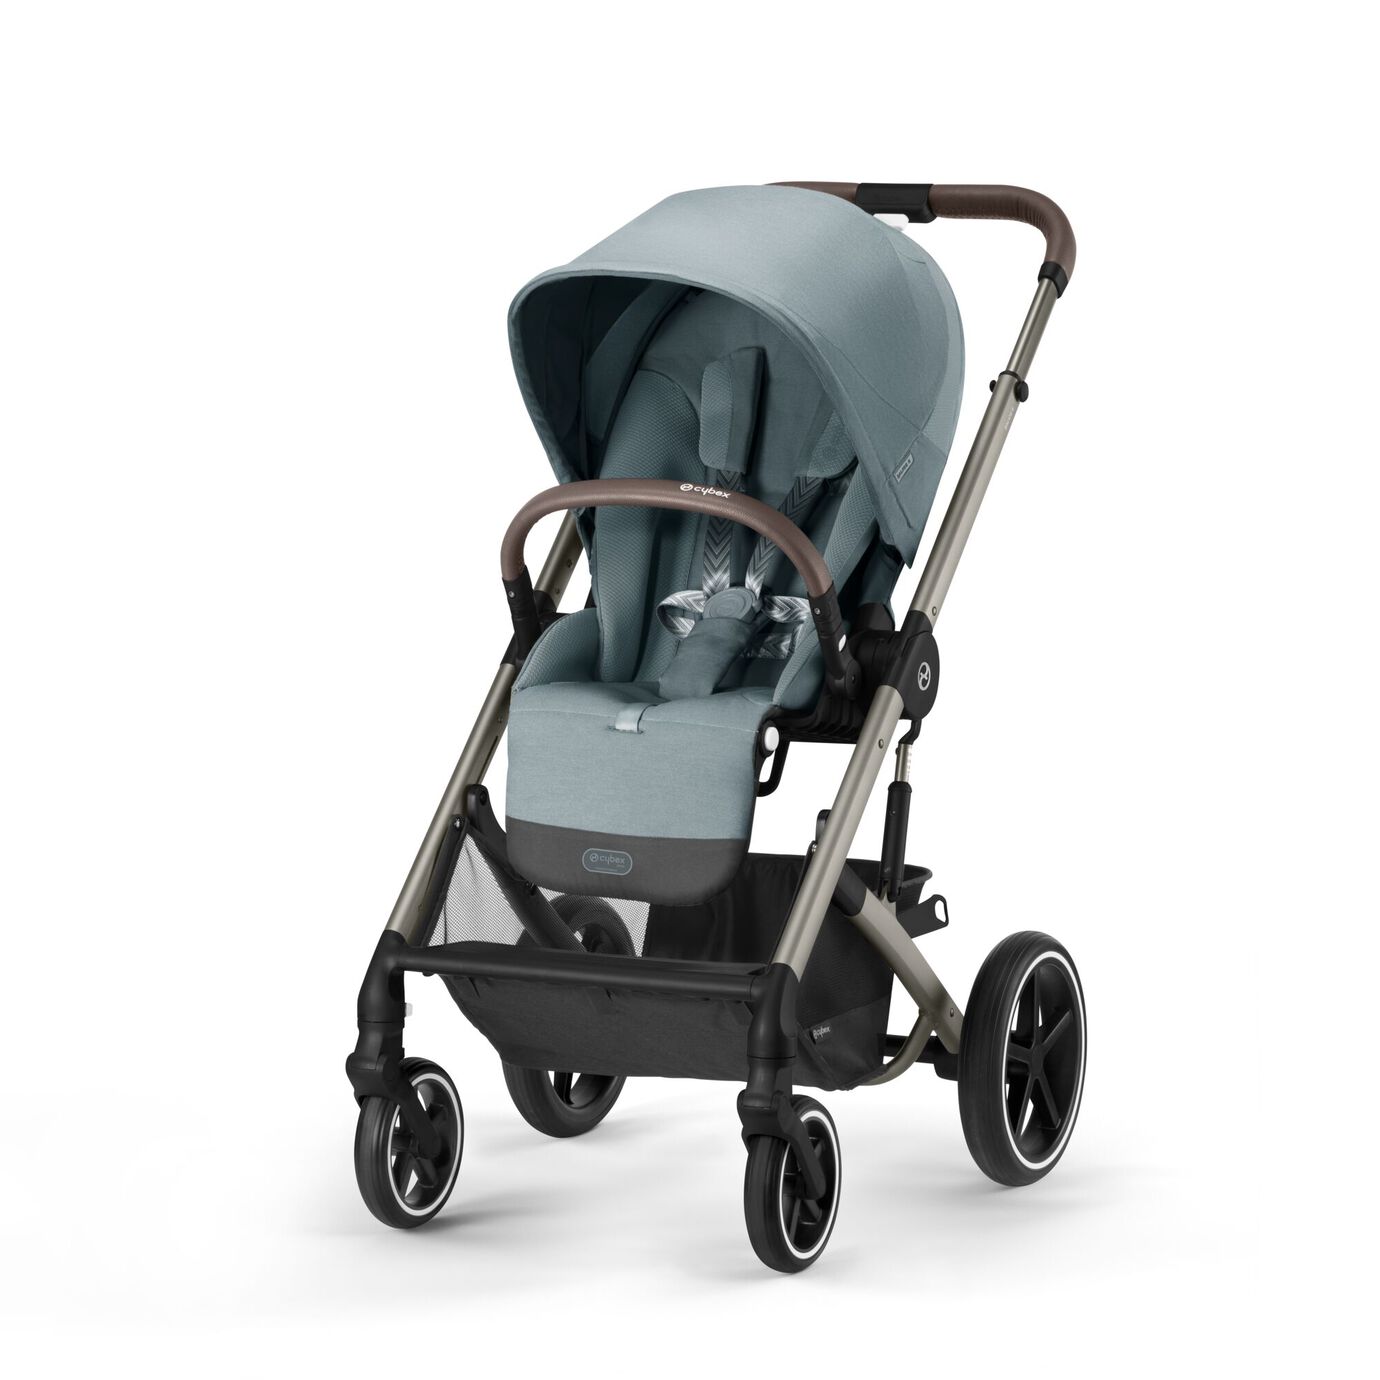 CYBEX BALIOS S LUX AND CLOUD T TRAVEL SYSTEM – Precious Cargo